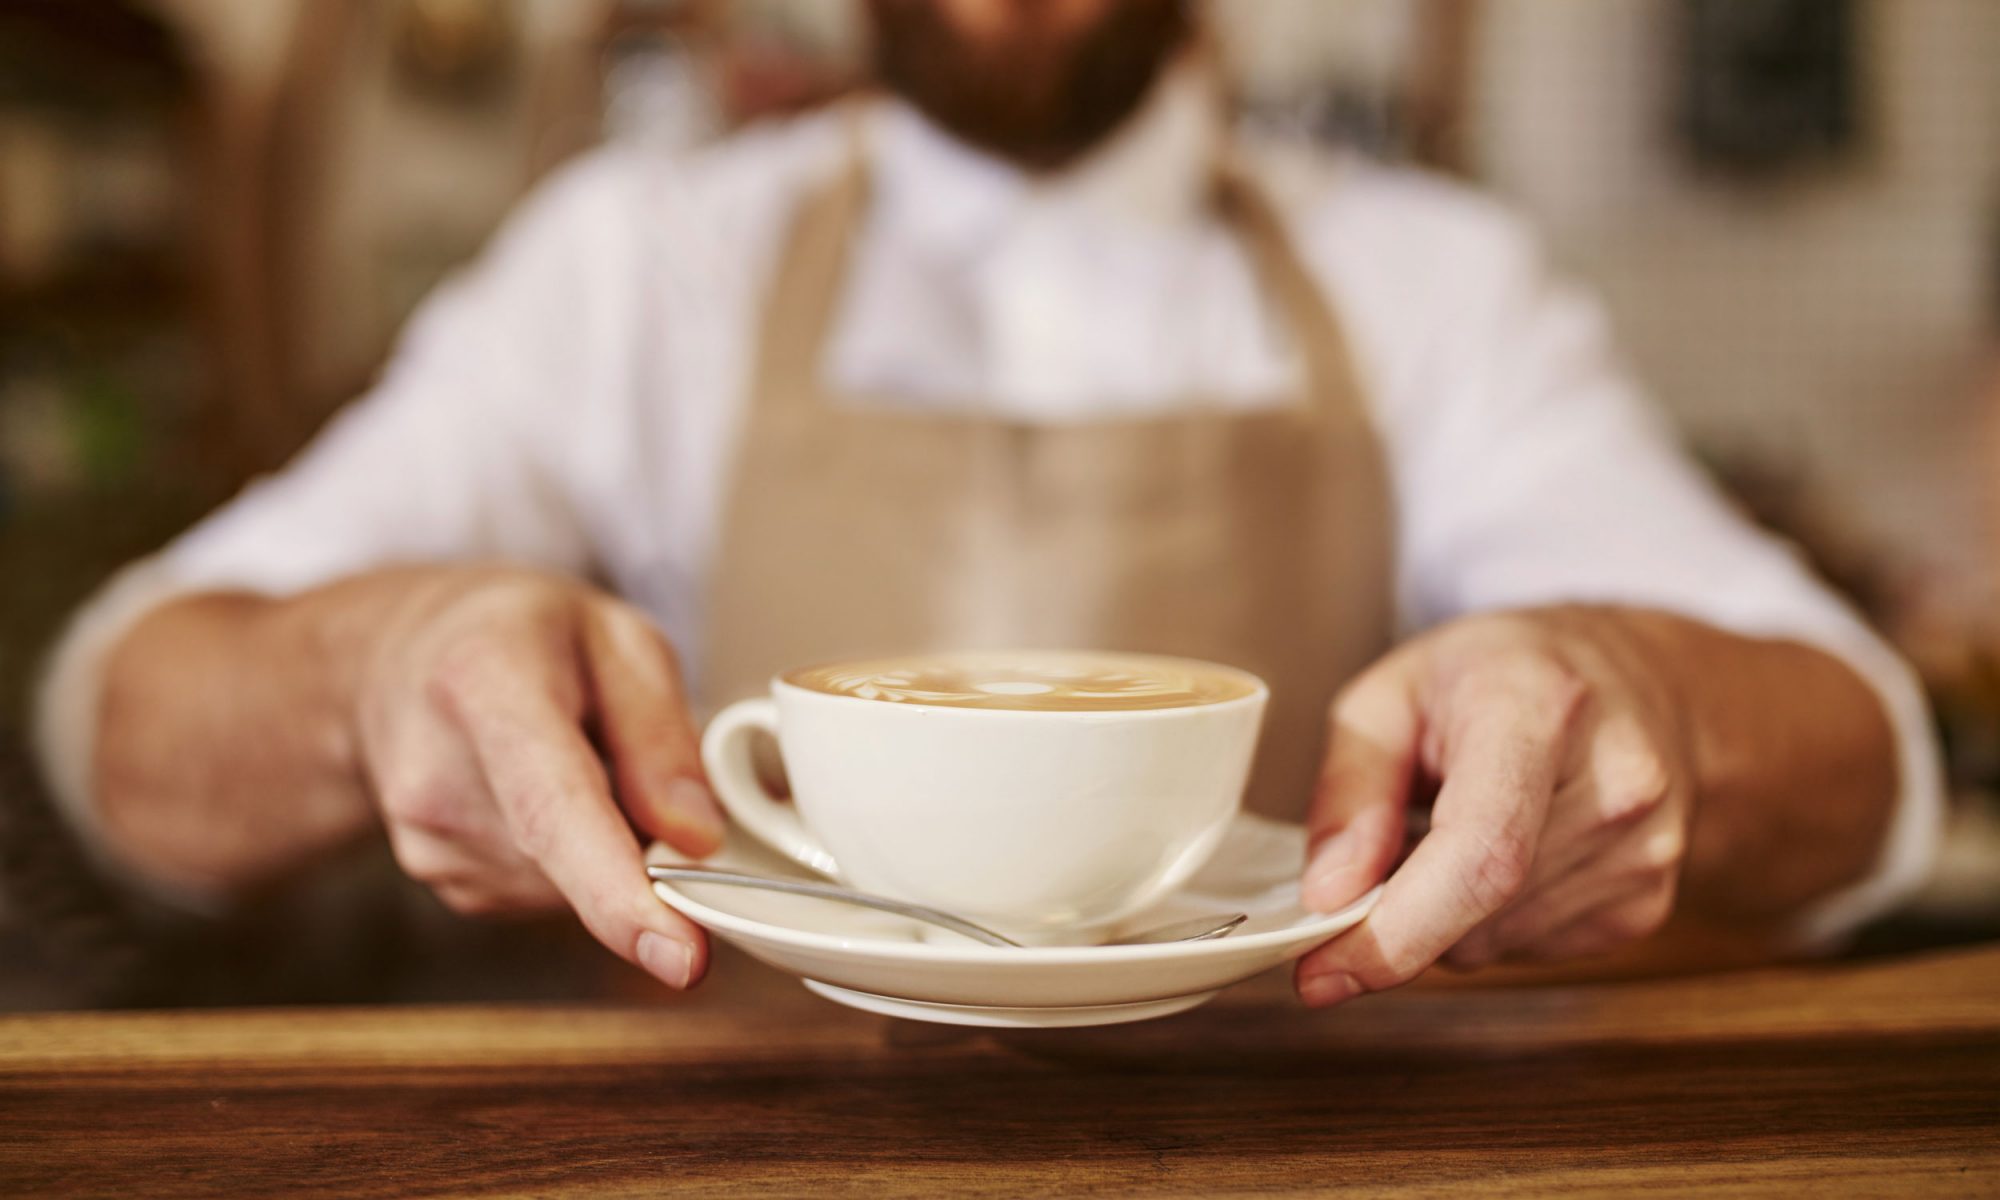 EC: 5 Things You Learn Working at a Coffee Shop